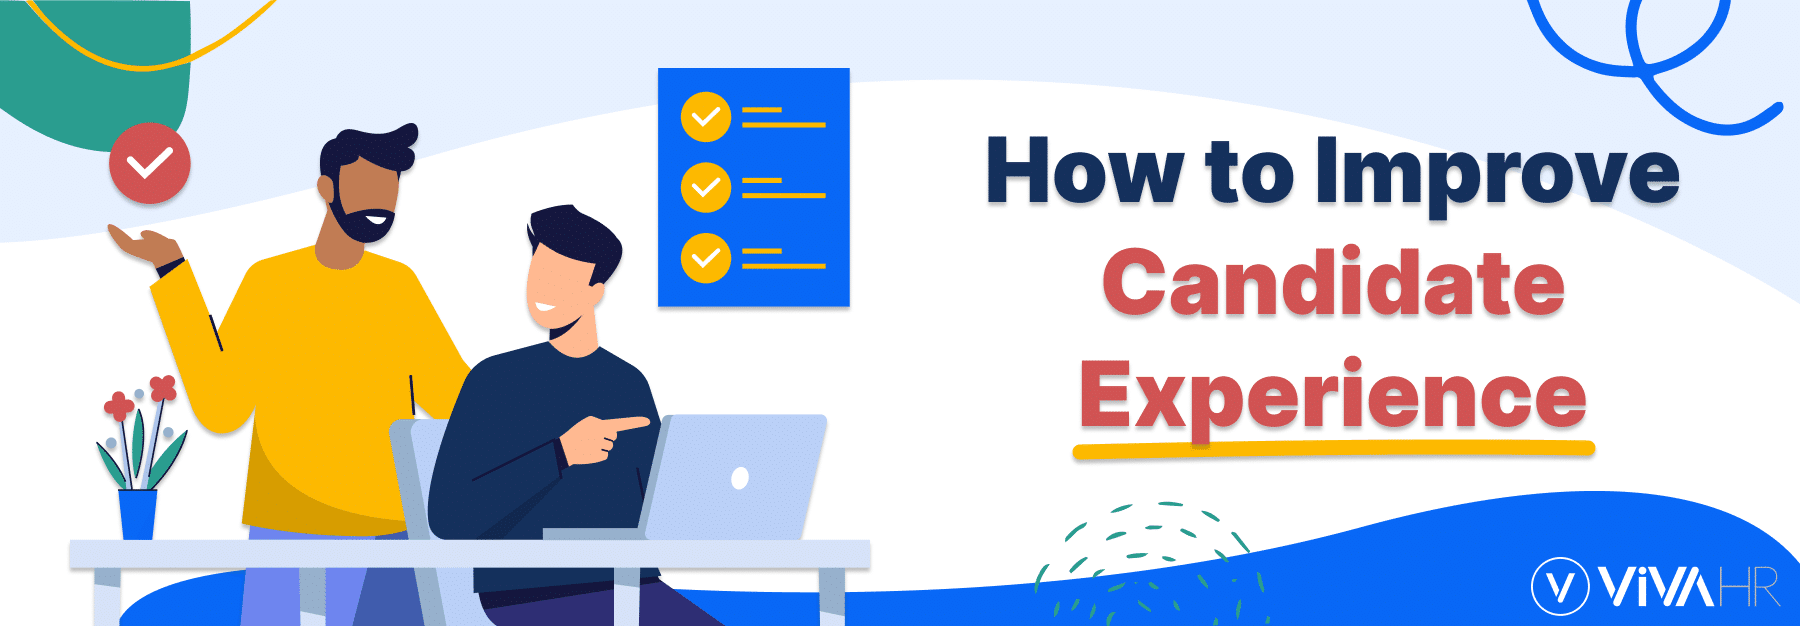 How To Improve Candidate Experience